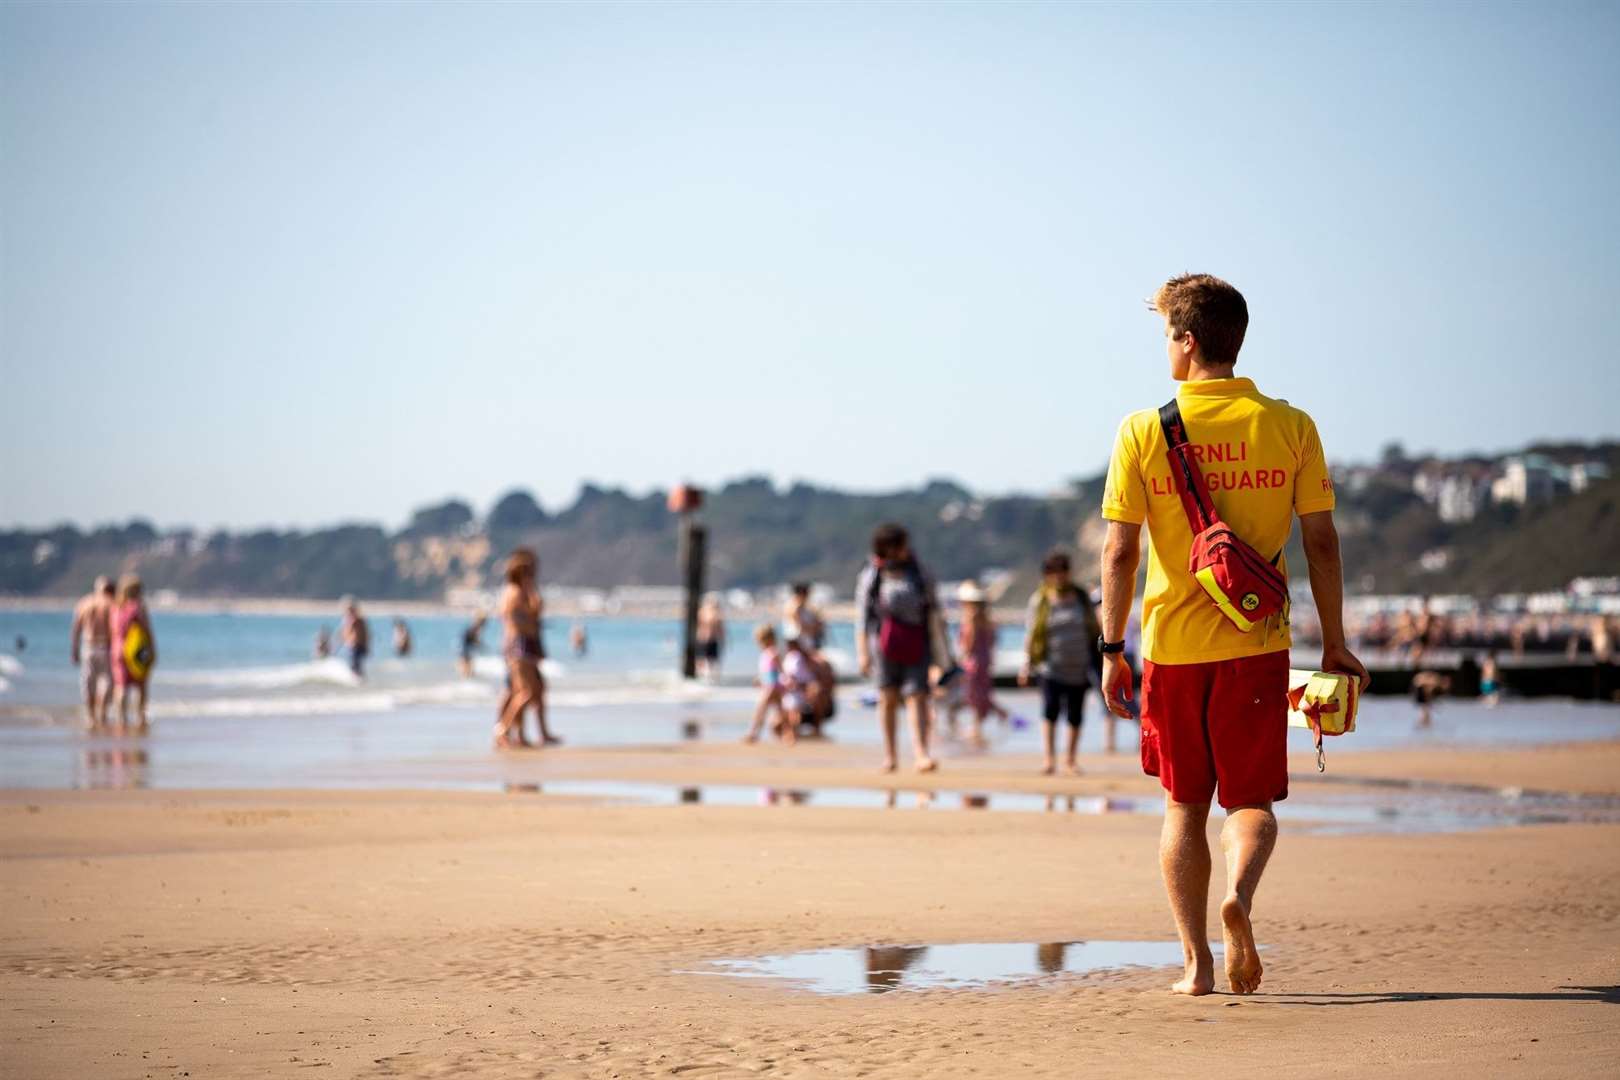 RNLI lifeguard keeping people safe on the beach. Picture: RNLI